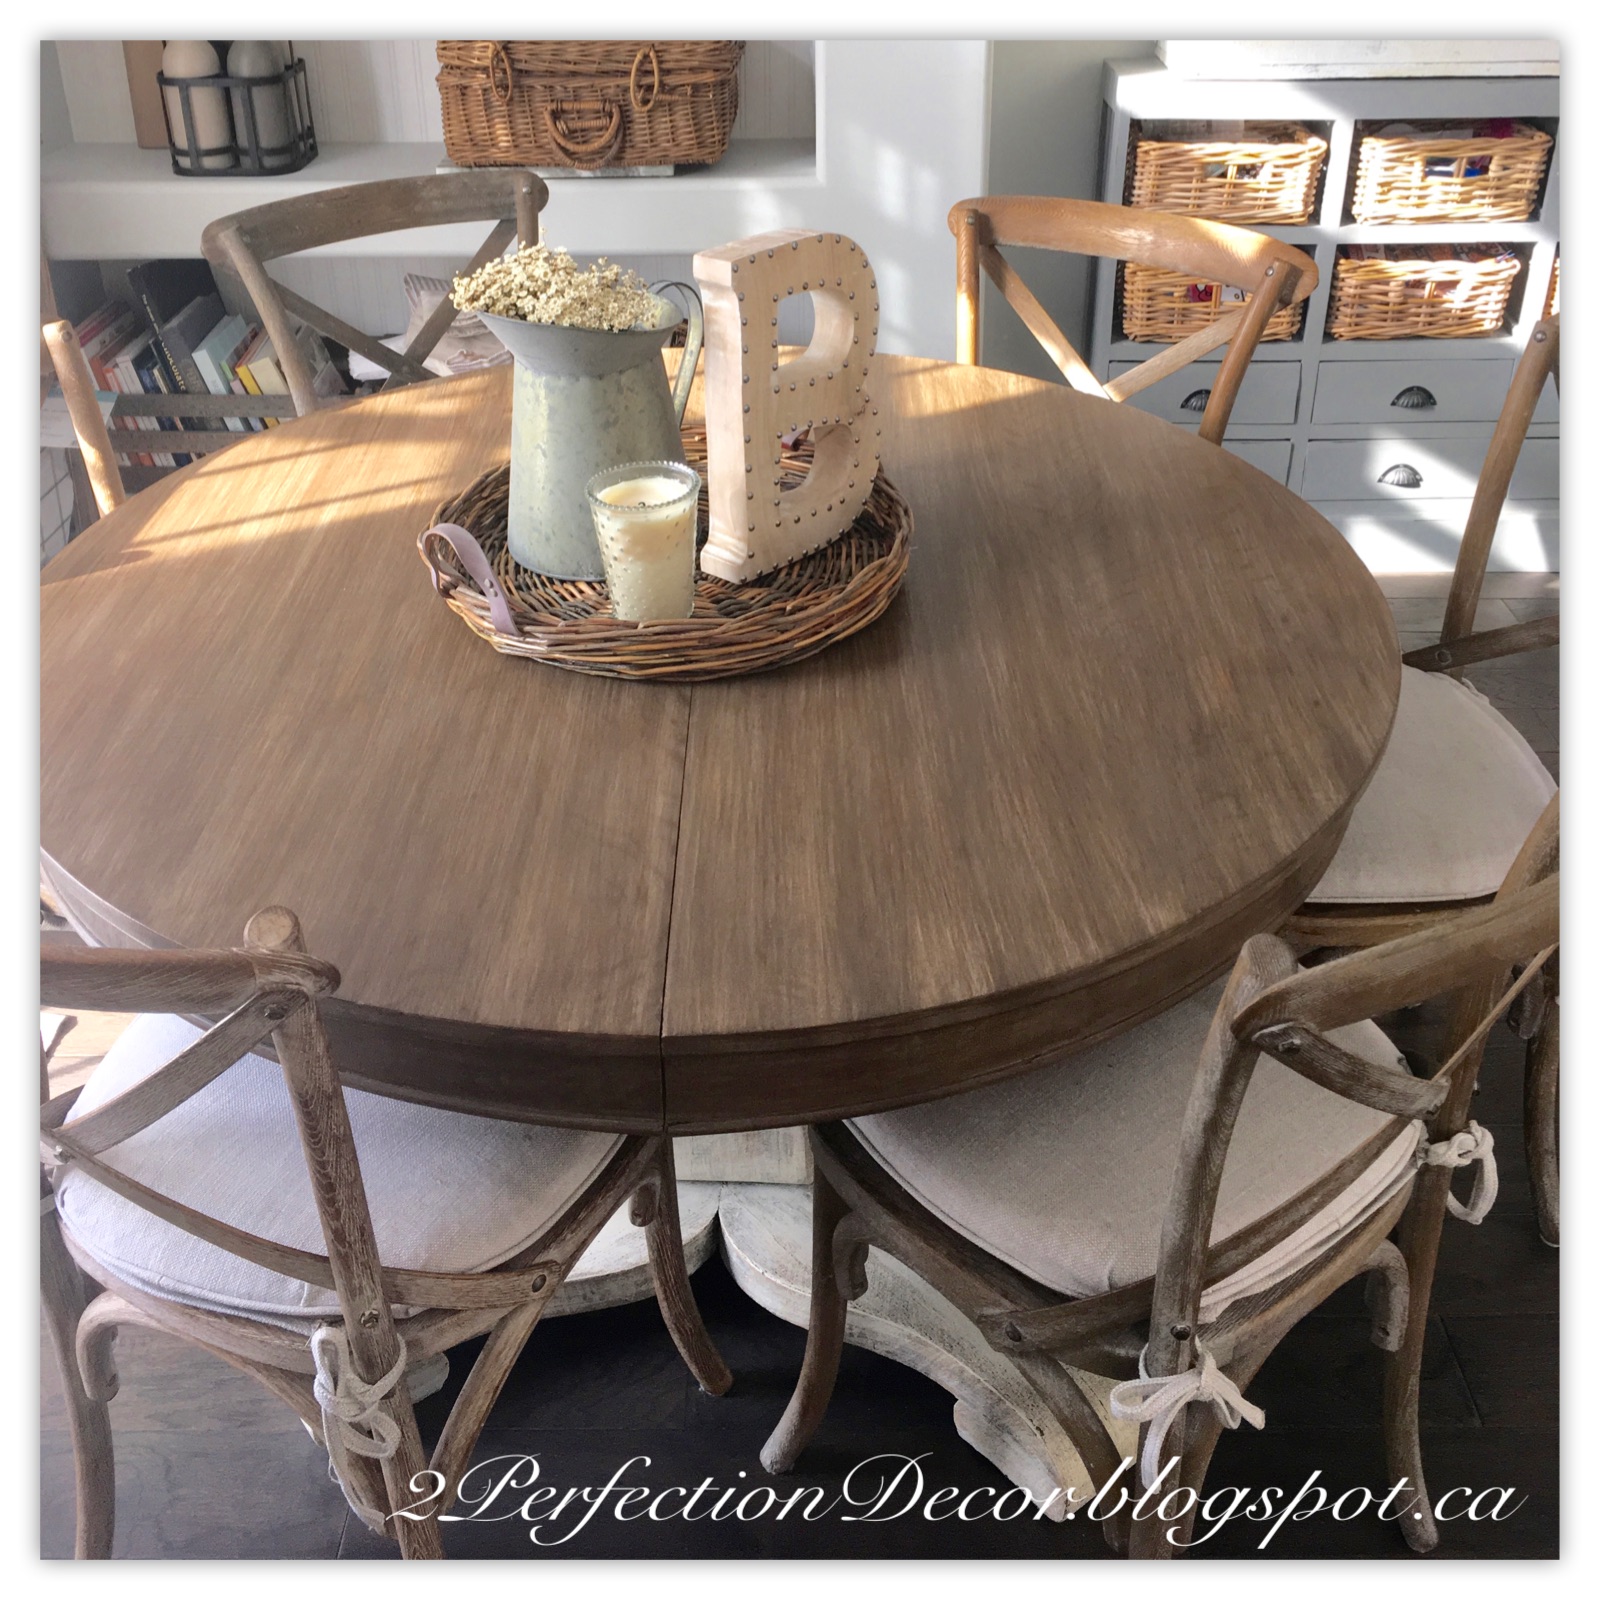 2Perfection Decor  Round  Kitchen  Table  Makeover